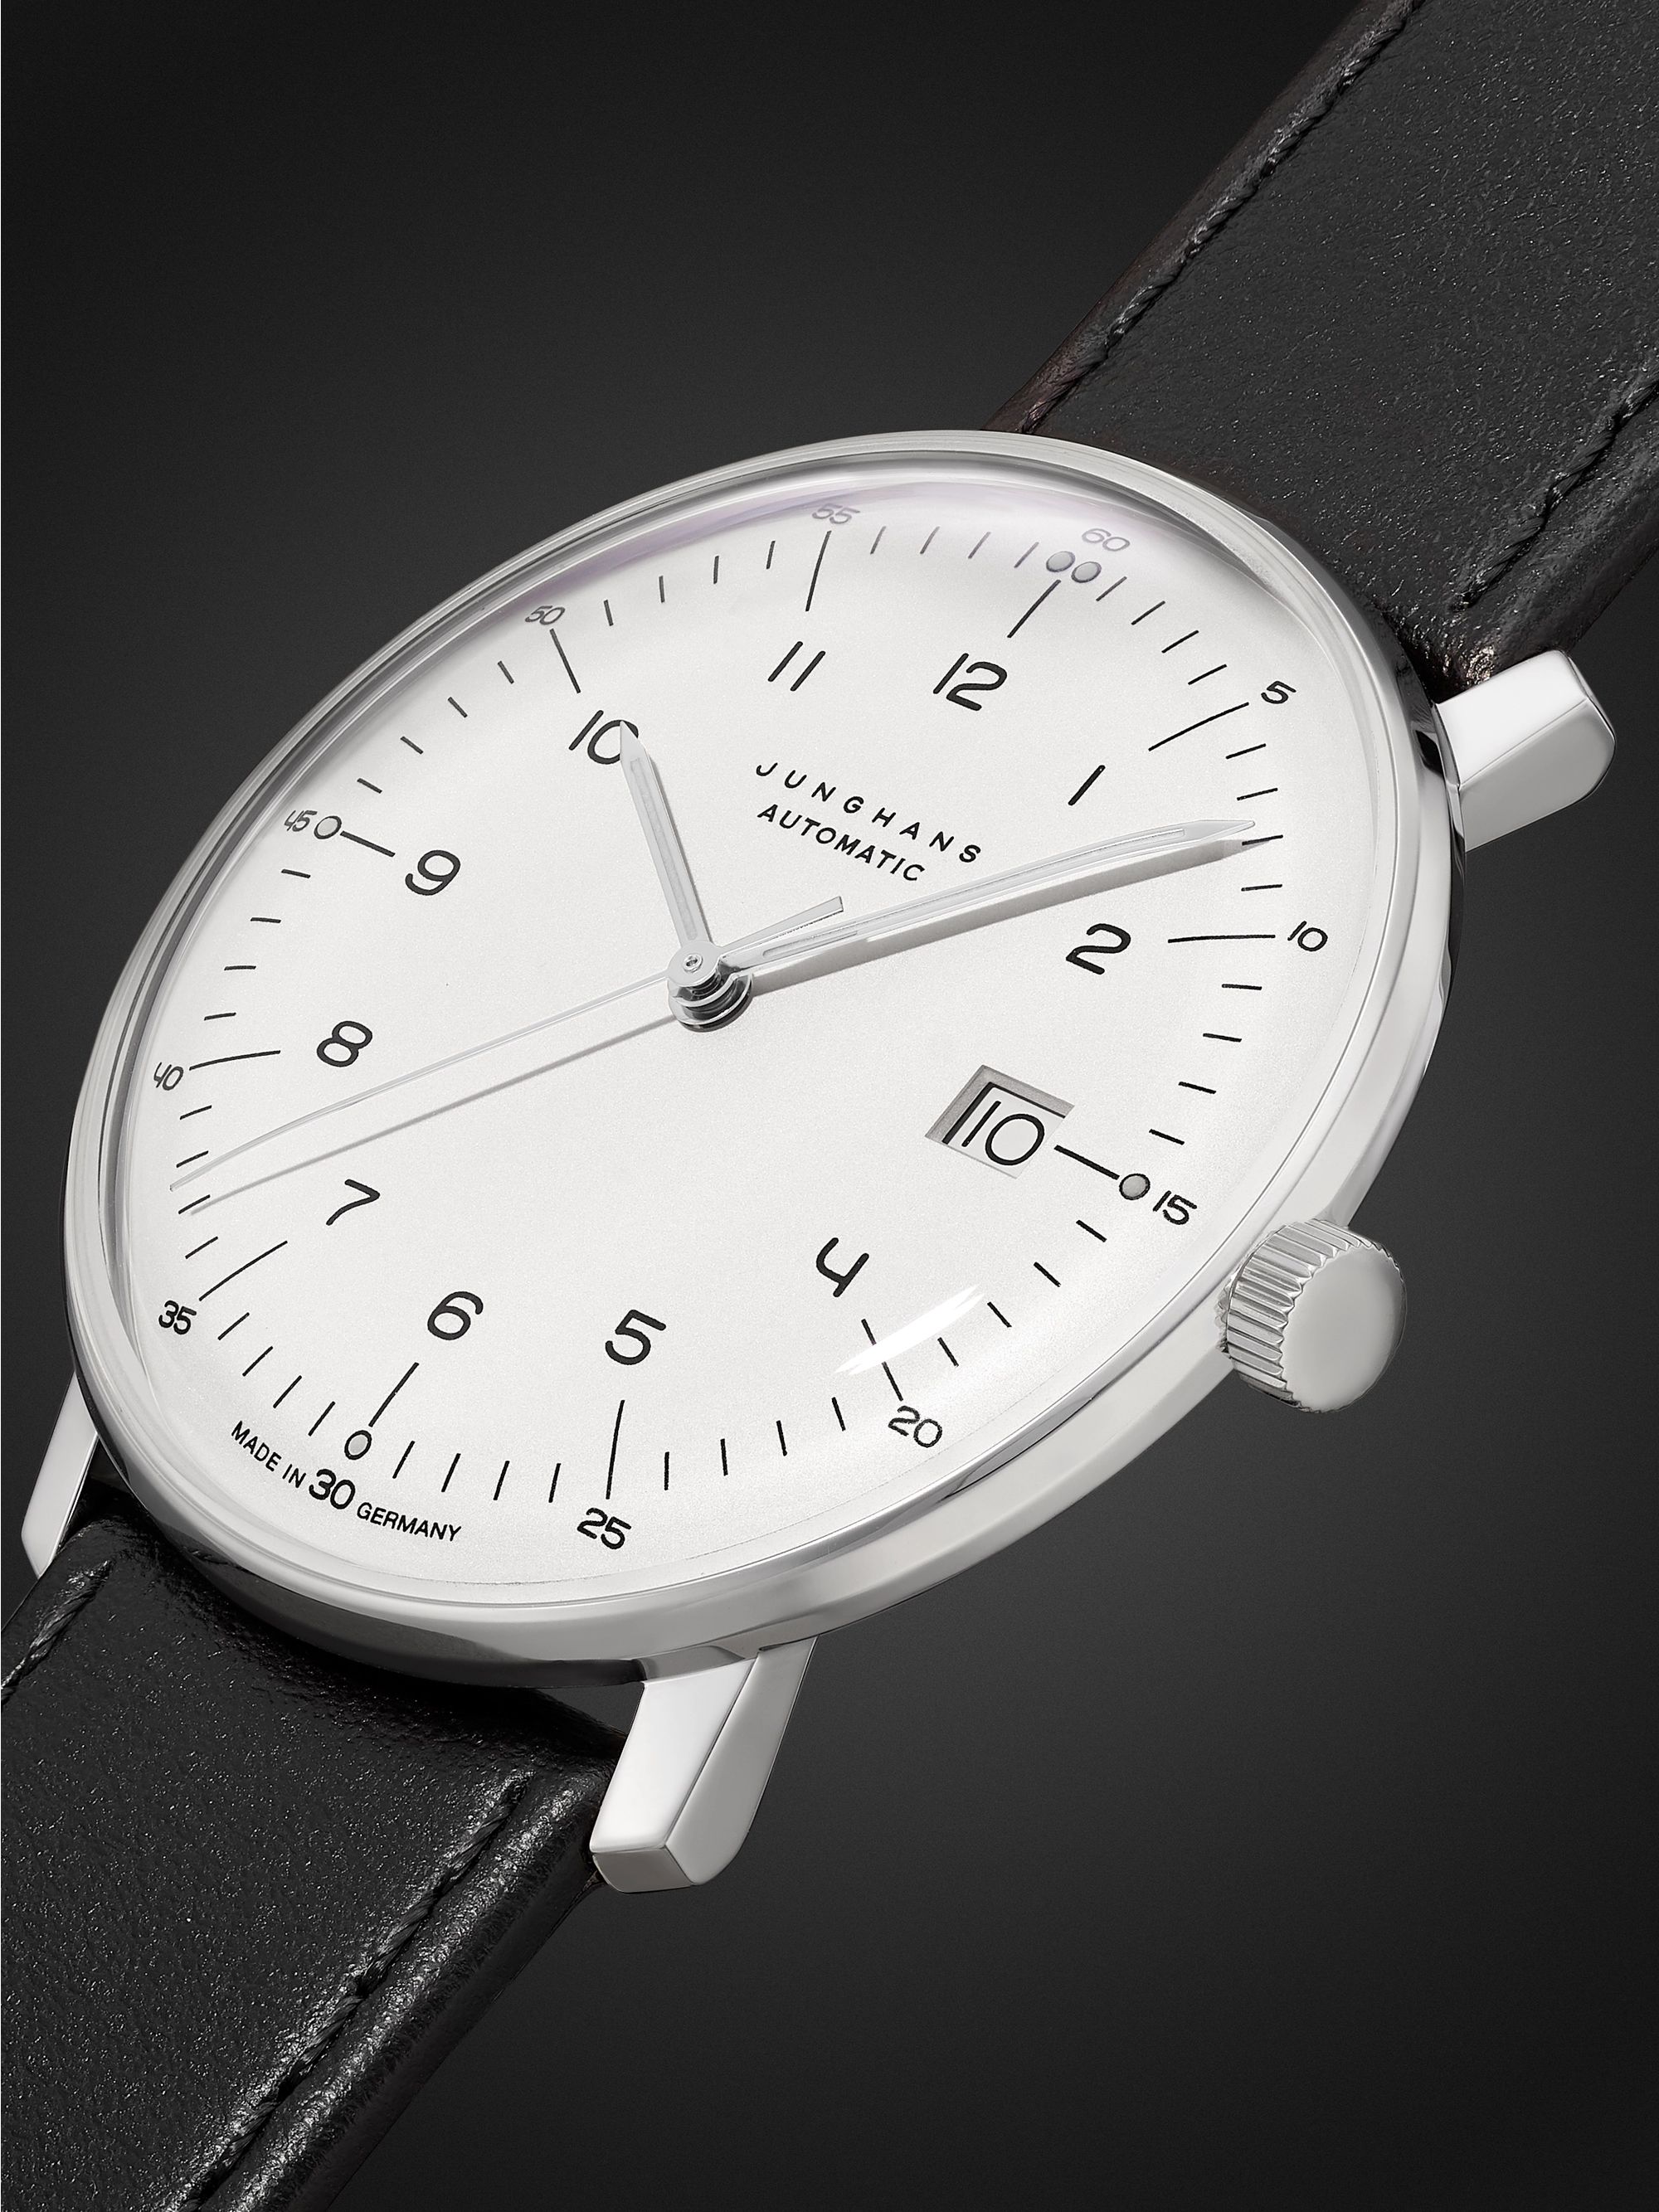 JUNGHANS Max Bill Automatic 38mm Stainless Steel and Leather Watch, Ref. No. 027/4700.02